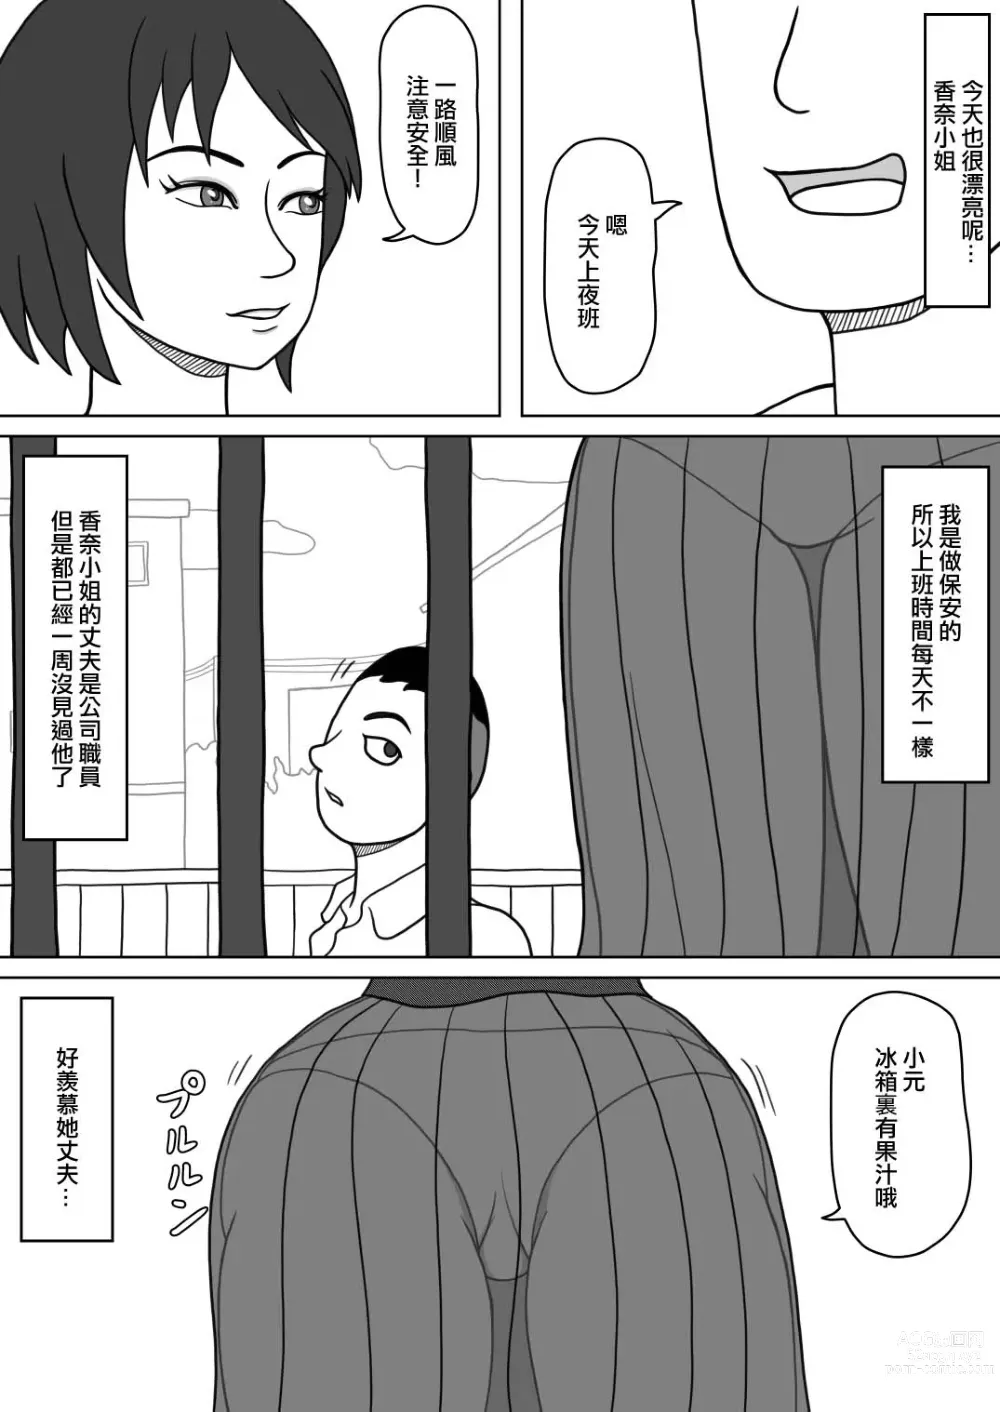 Page 3 of doujinshi 201號房的鄰居